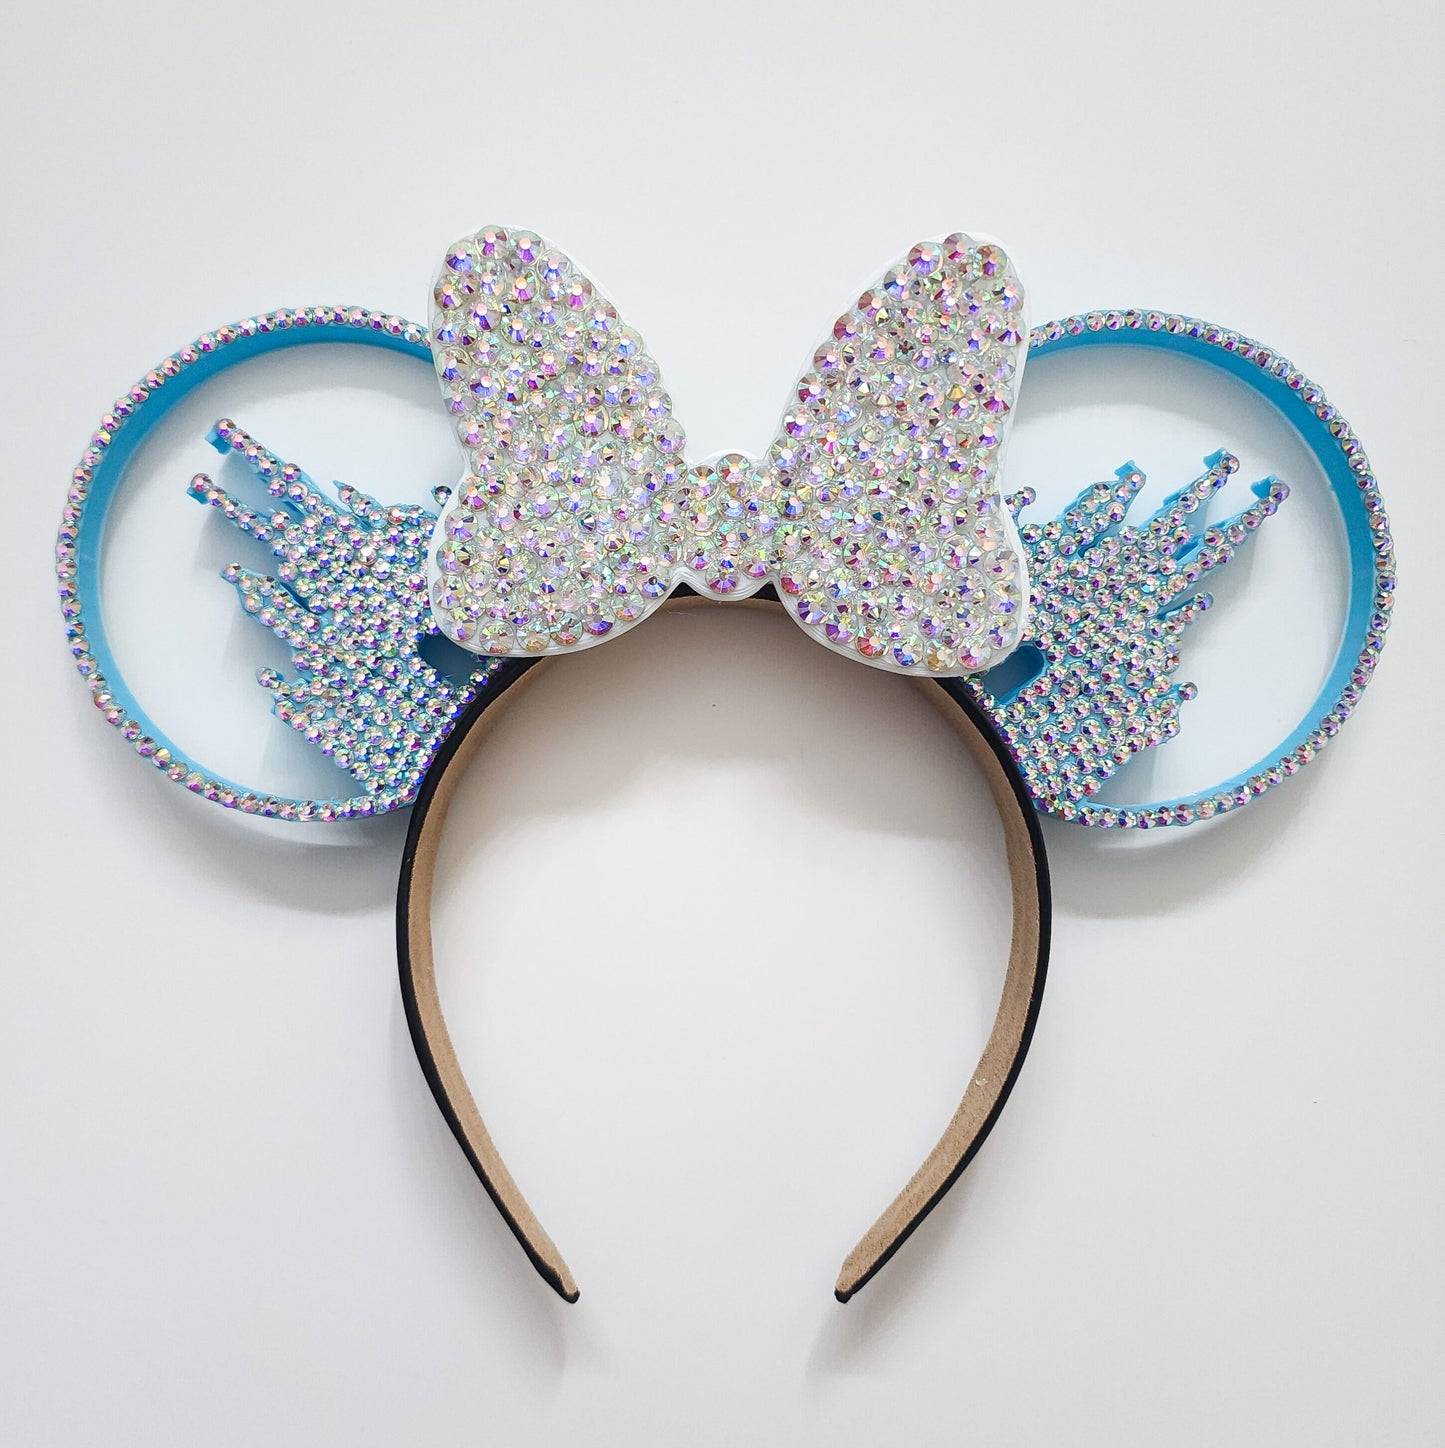 Florida Castle Dreams ,Rhinestone 3D castle inspired Ears with Rhinestone Bow OR Sequin bow